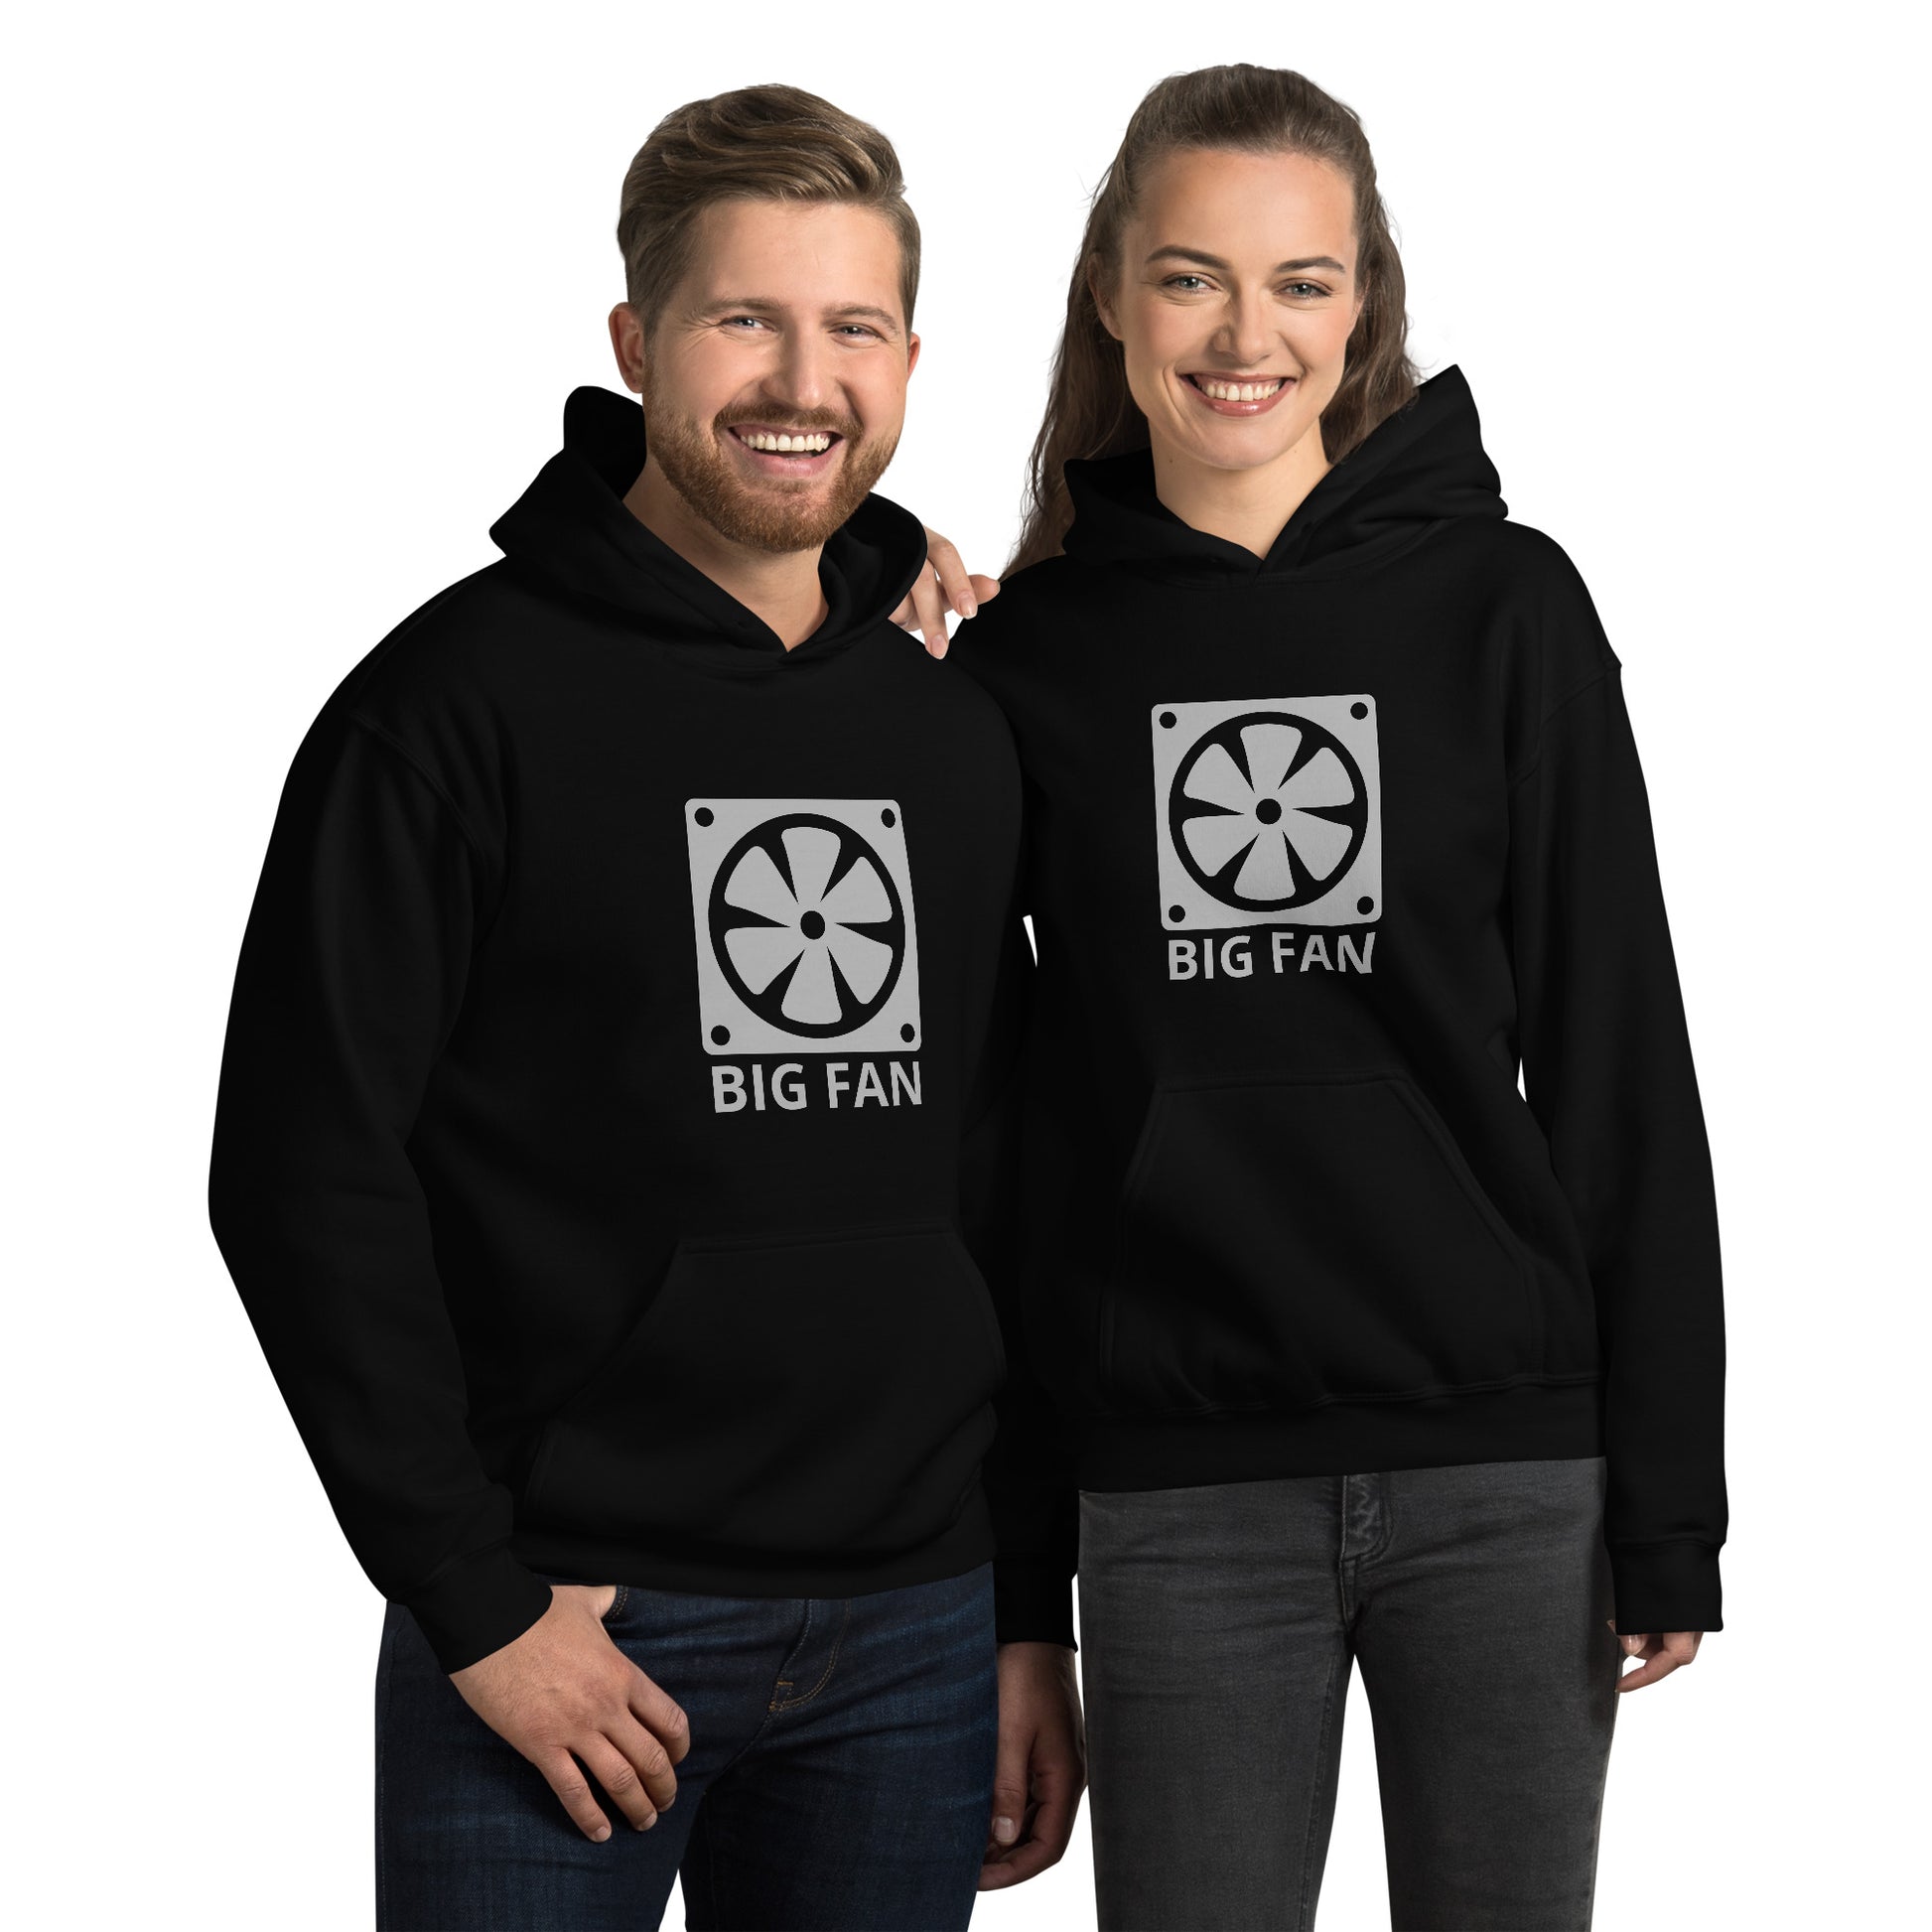 Man and women with black hoodie with image of a big computer fan and the text "BIG FAN"